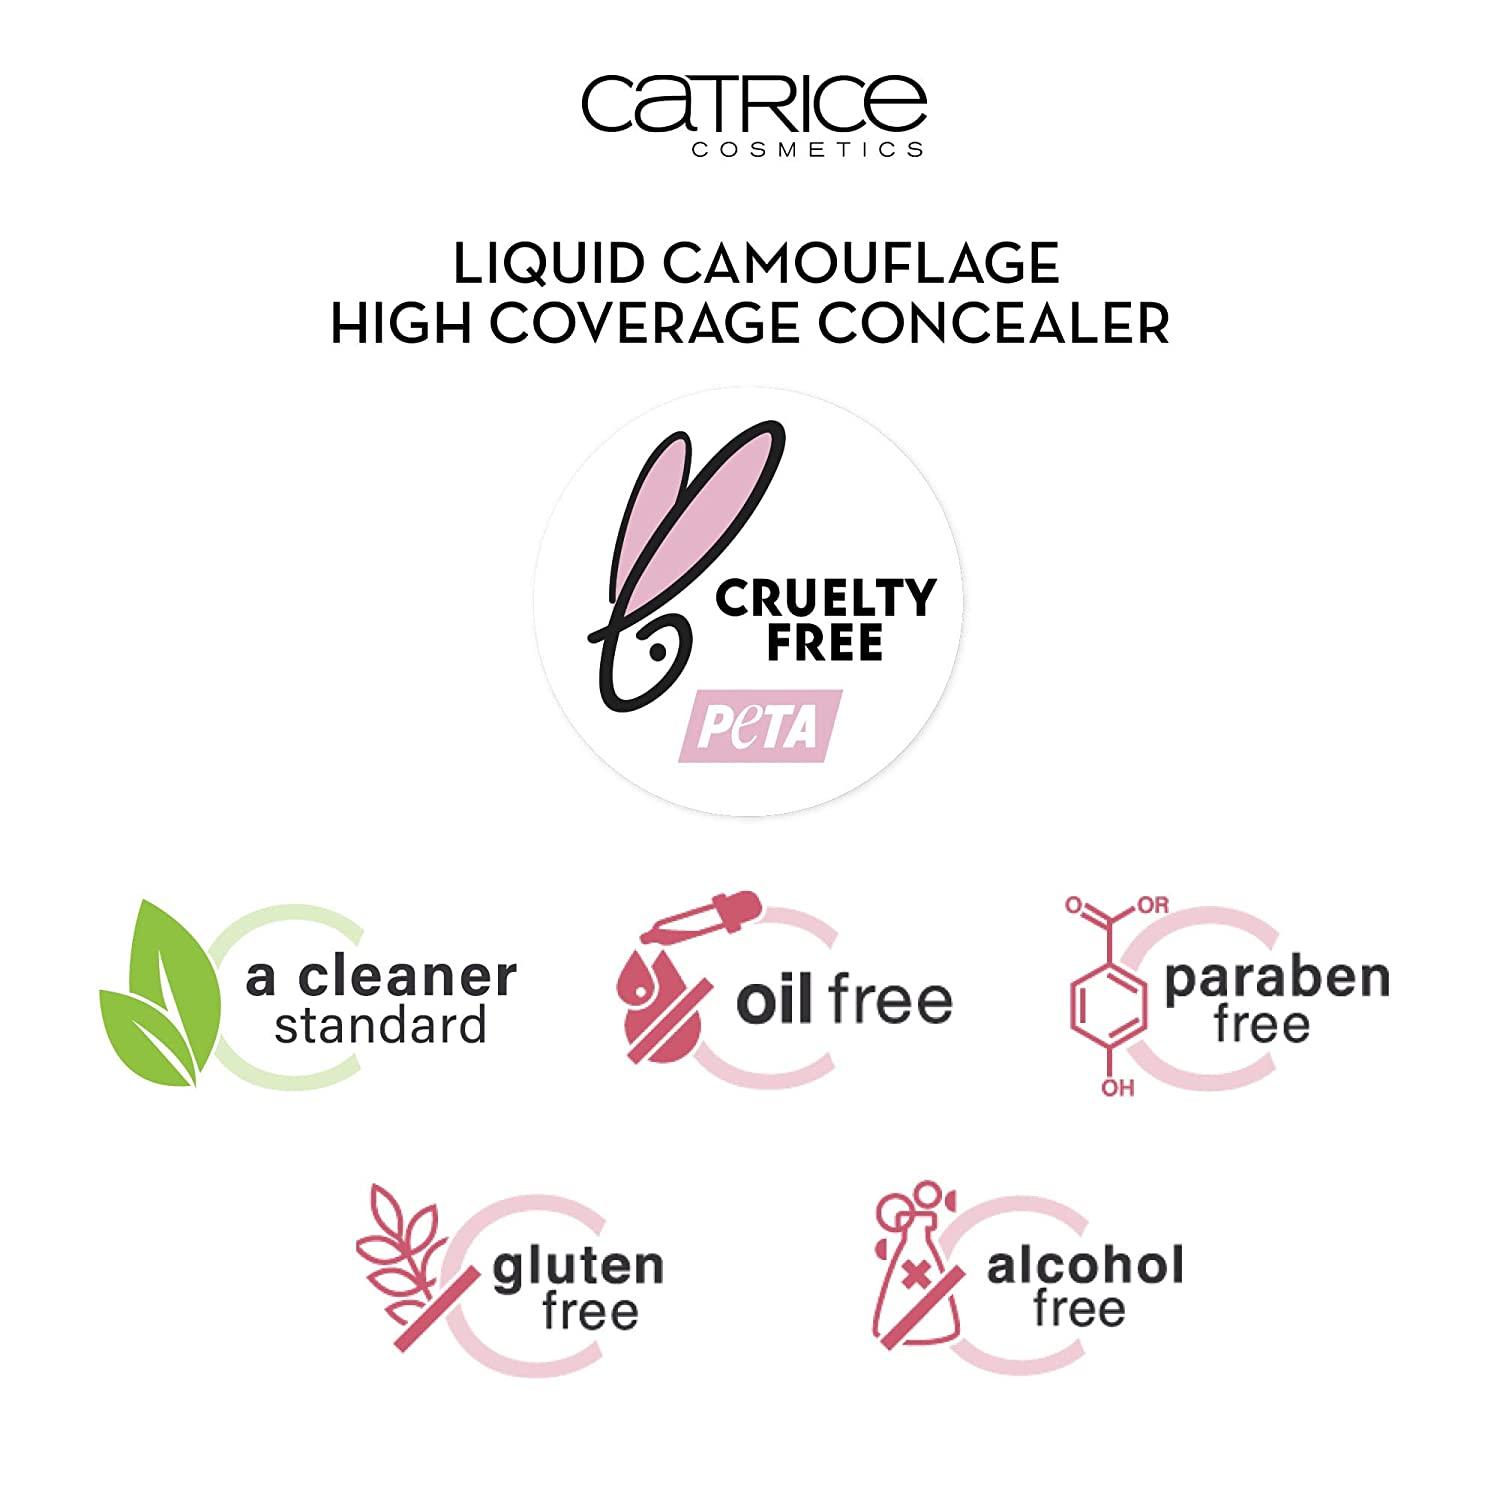 Light Cruelty Paraben Liquid Catrice Long Concealer (020 Oil | Concealer Free Beige) & Coverage | | | Ultra High Camouflage Free | Lasting